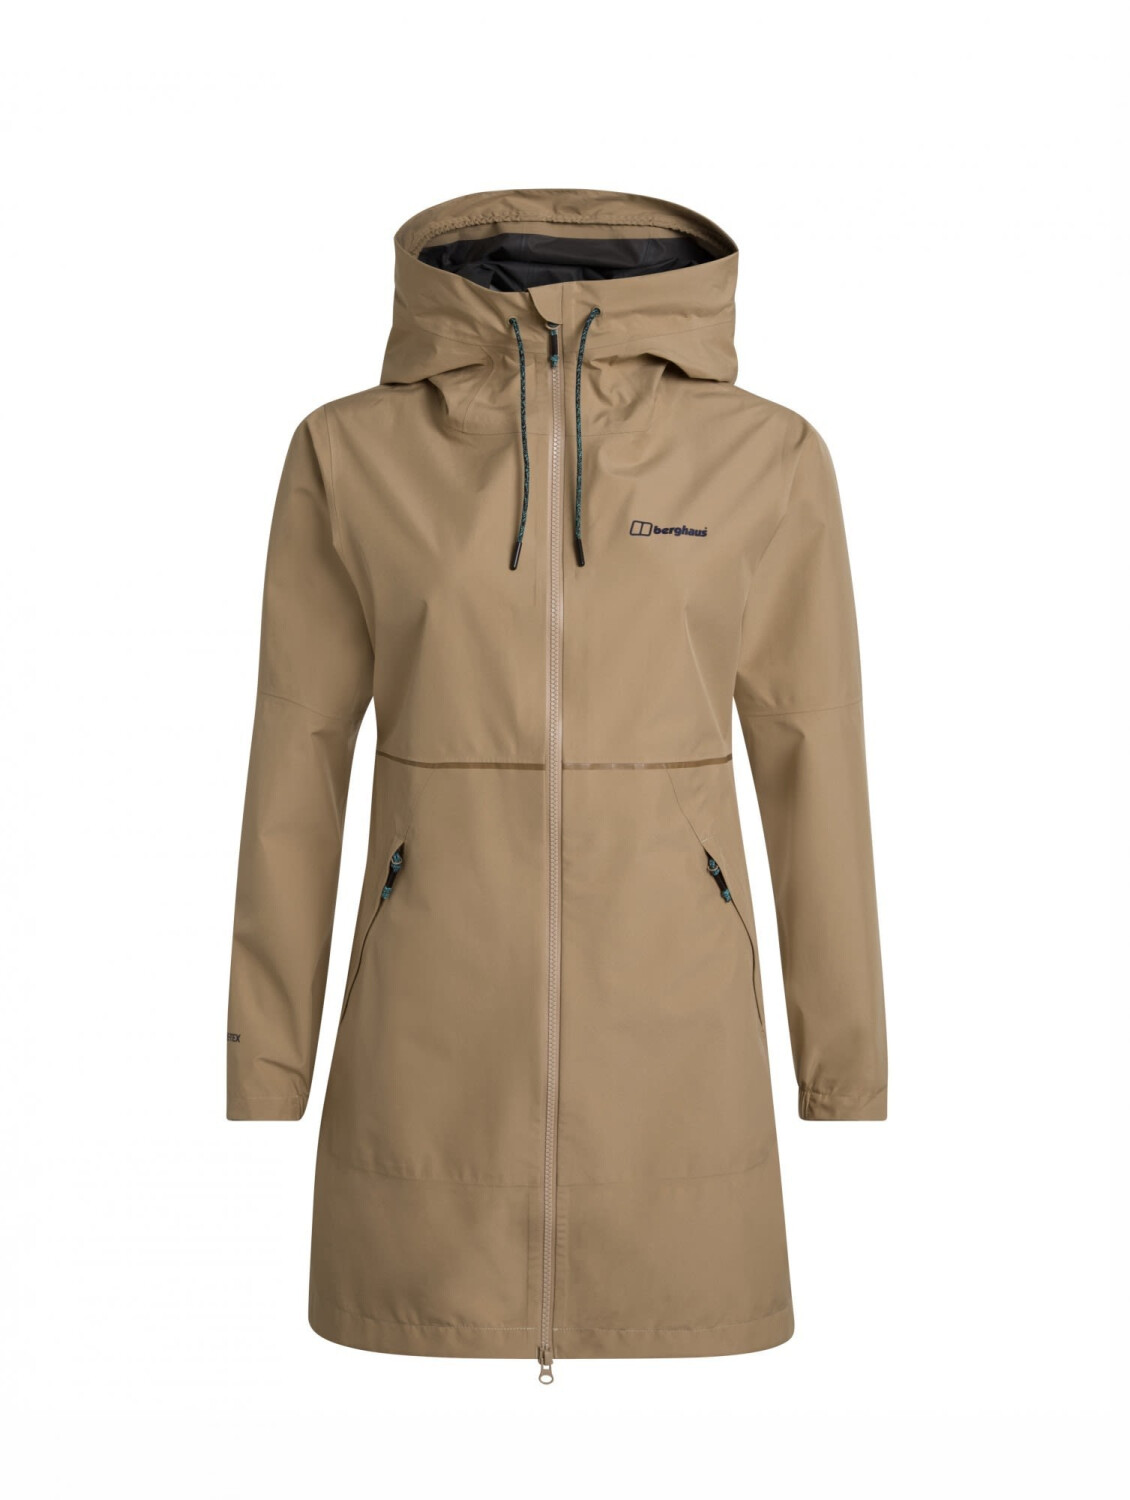 Buy Berghaus Women's Rothley Waterproof Jacket from £92.50 (Today ...